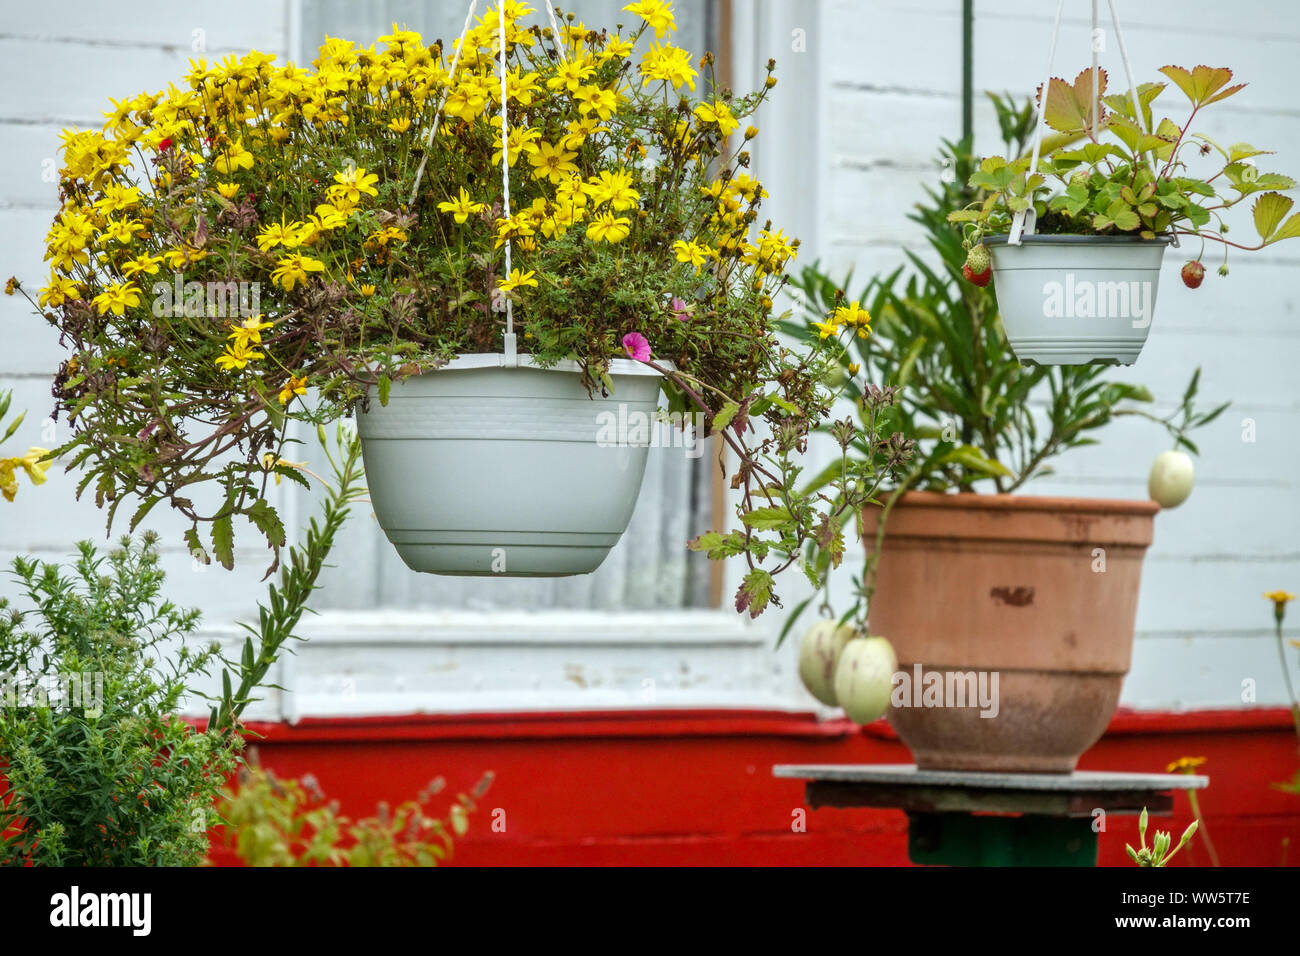 Yellow flowers in hanging pots in a garden hanging plants Stock Photo